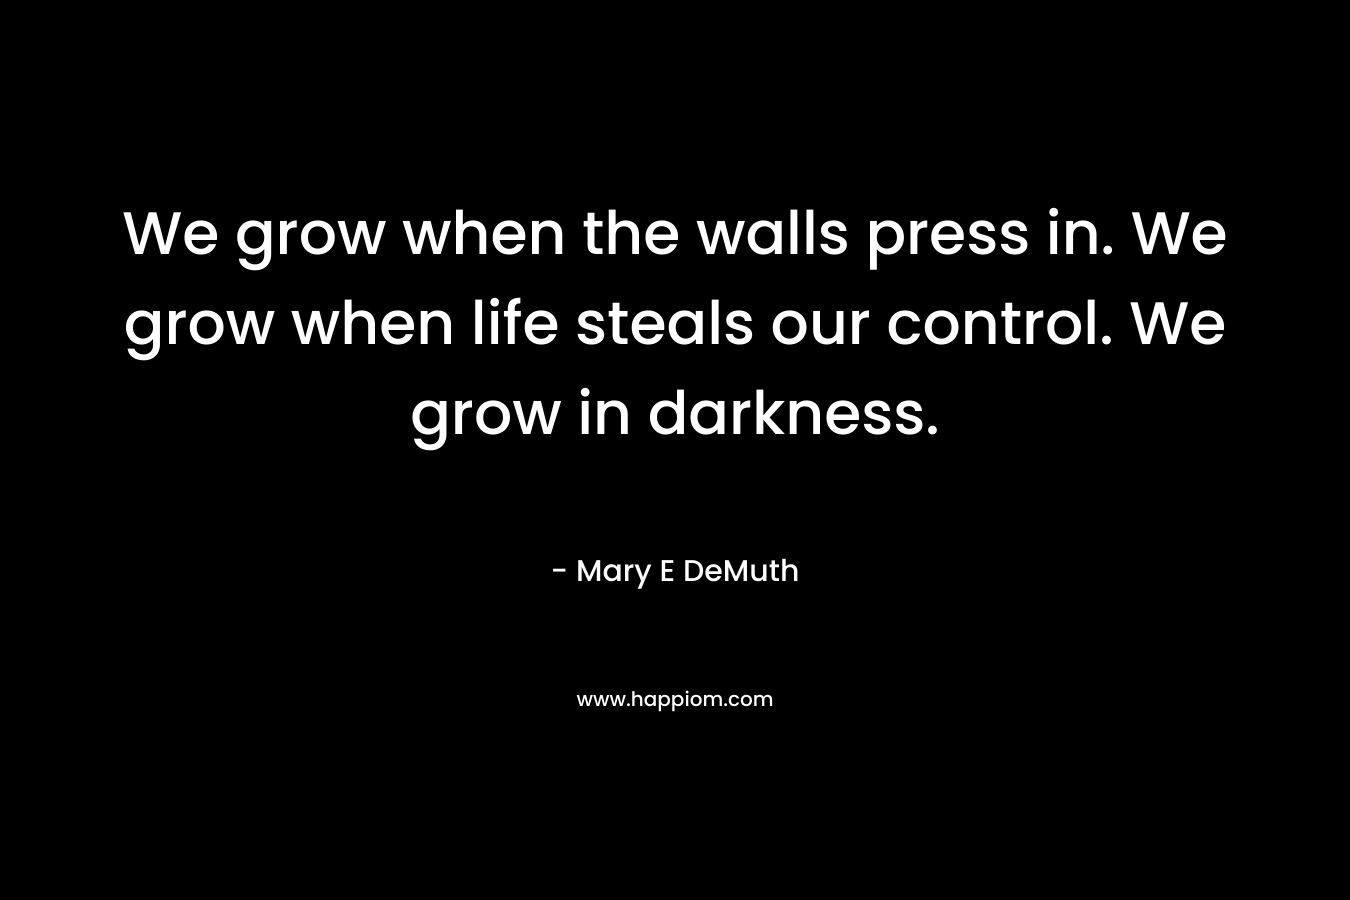 We grow when the walls press in. We grow when life steals our control. We grow in darkness.